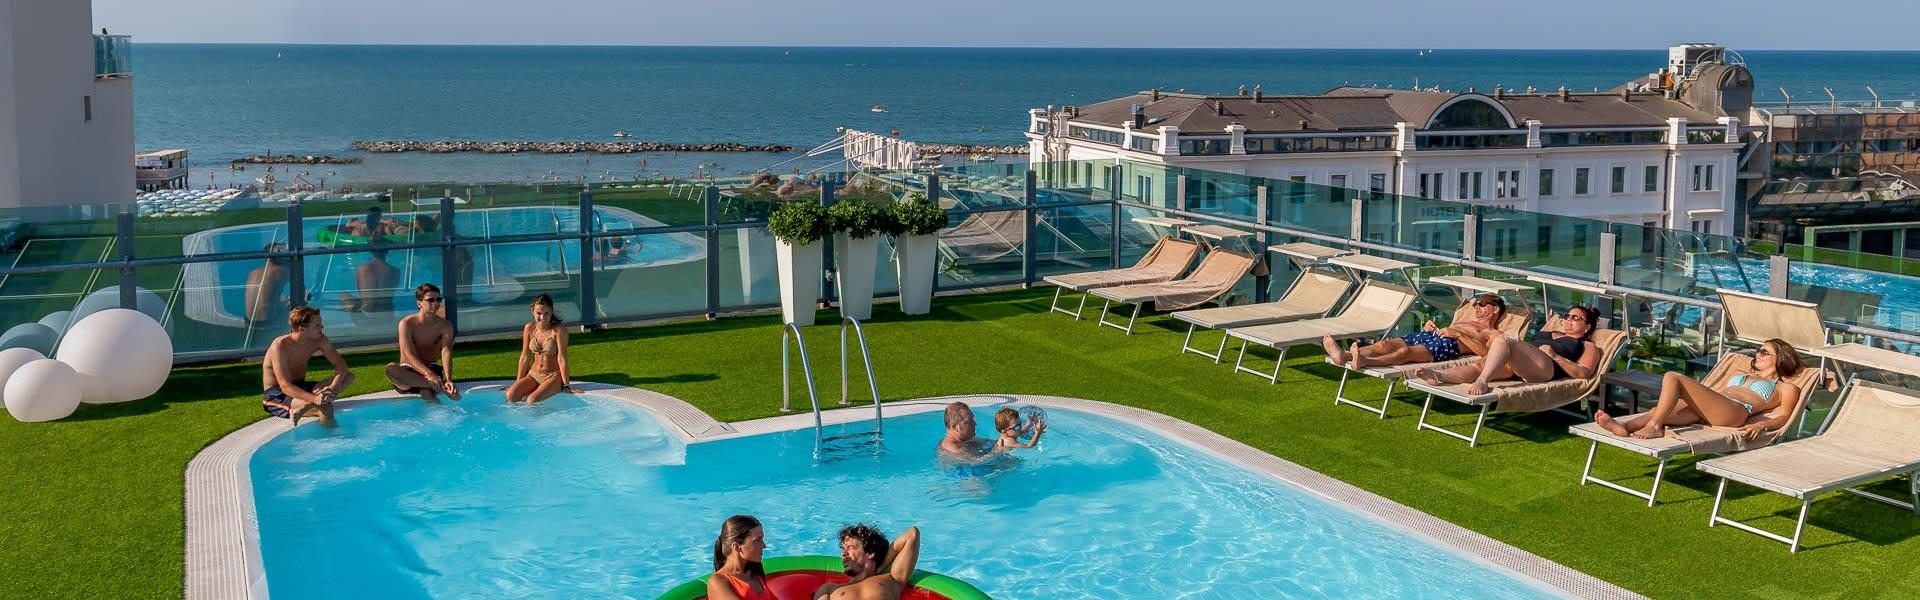 hotelsanmarcocattolica fr offre-speciale-upgrade-chambres-deluxe-a-l-hotel-a-la-mer-a-cattolica 003